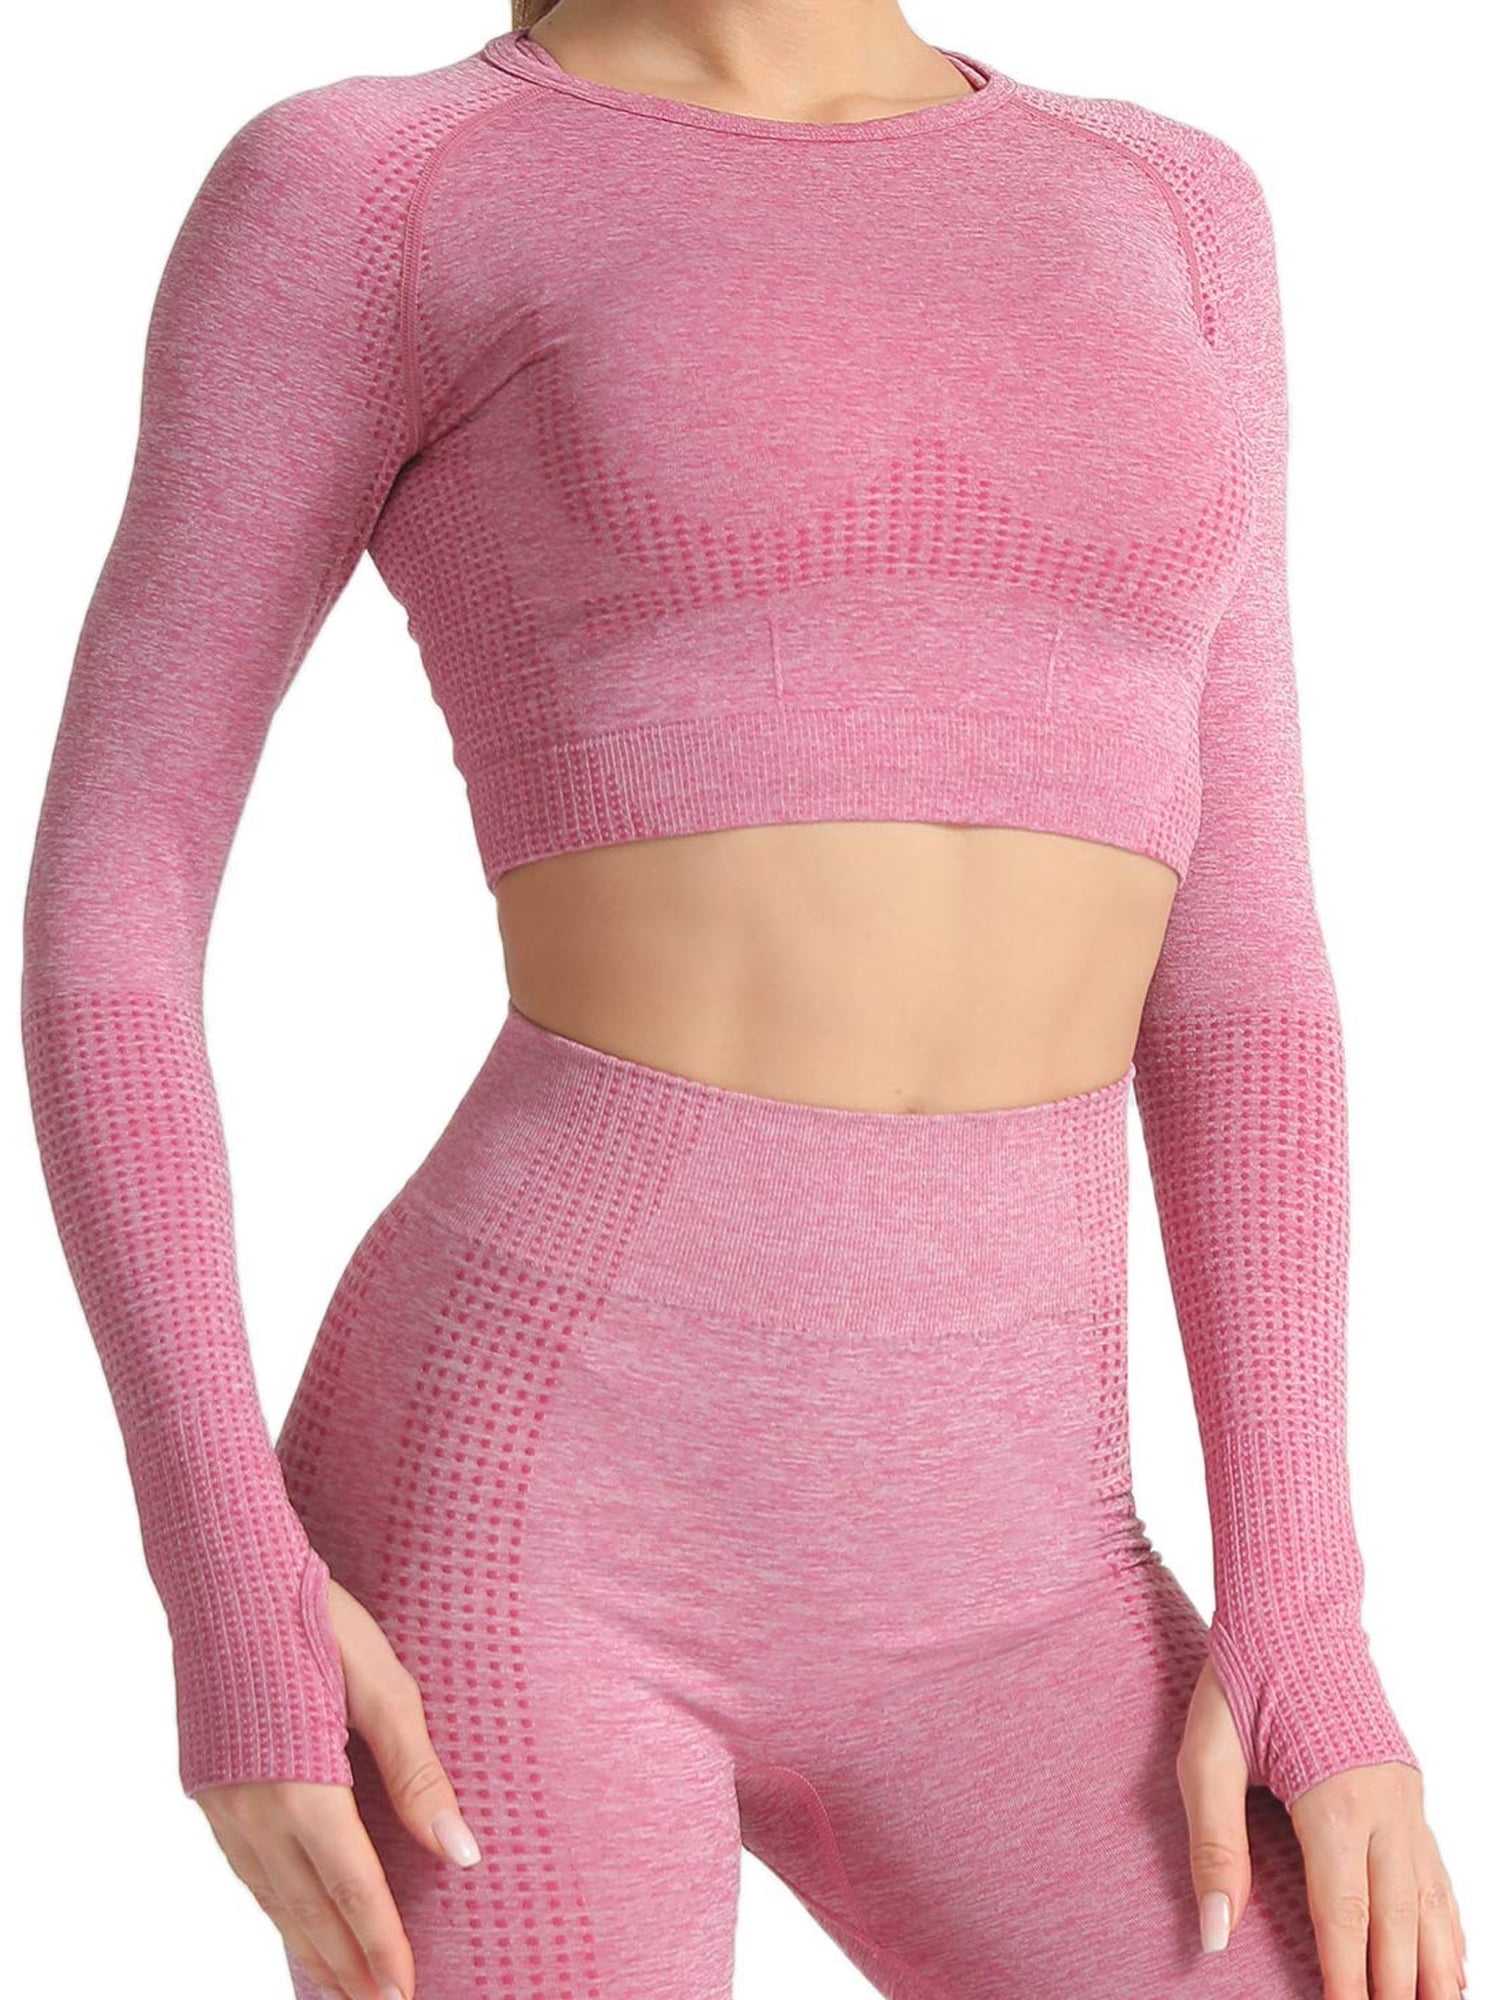 Seamless Yoga Gym Crop Top Compression Workout Athletic Long Sleeve Shirt  with Thumbhole - Walmart.com